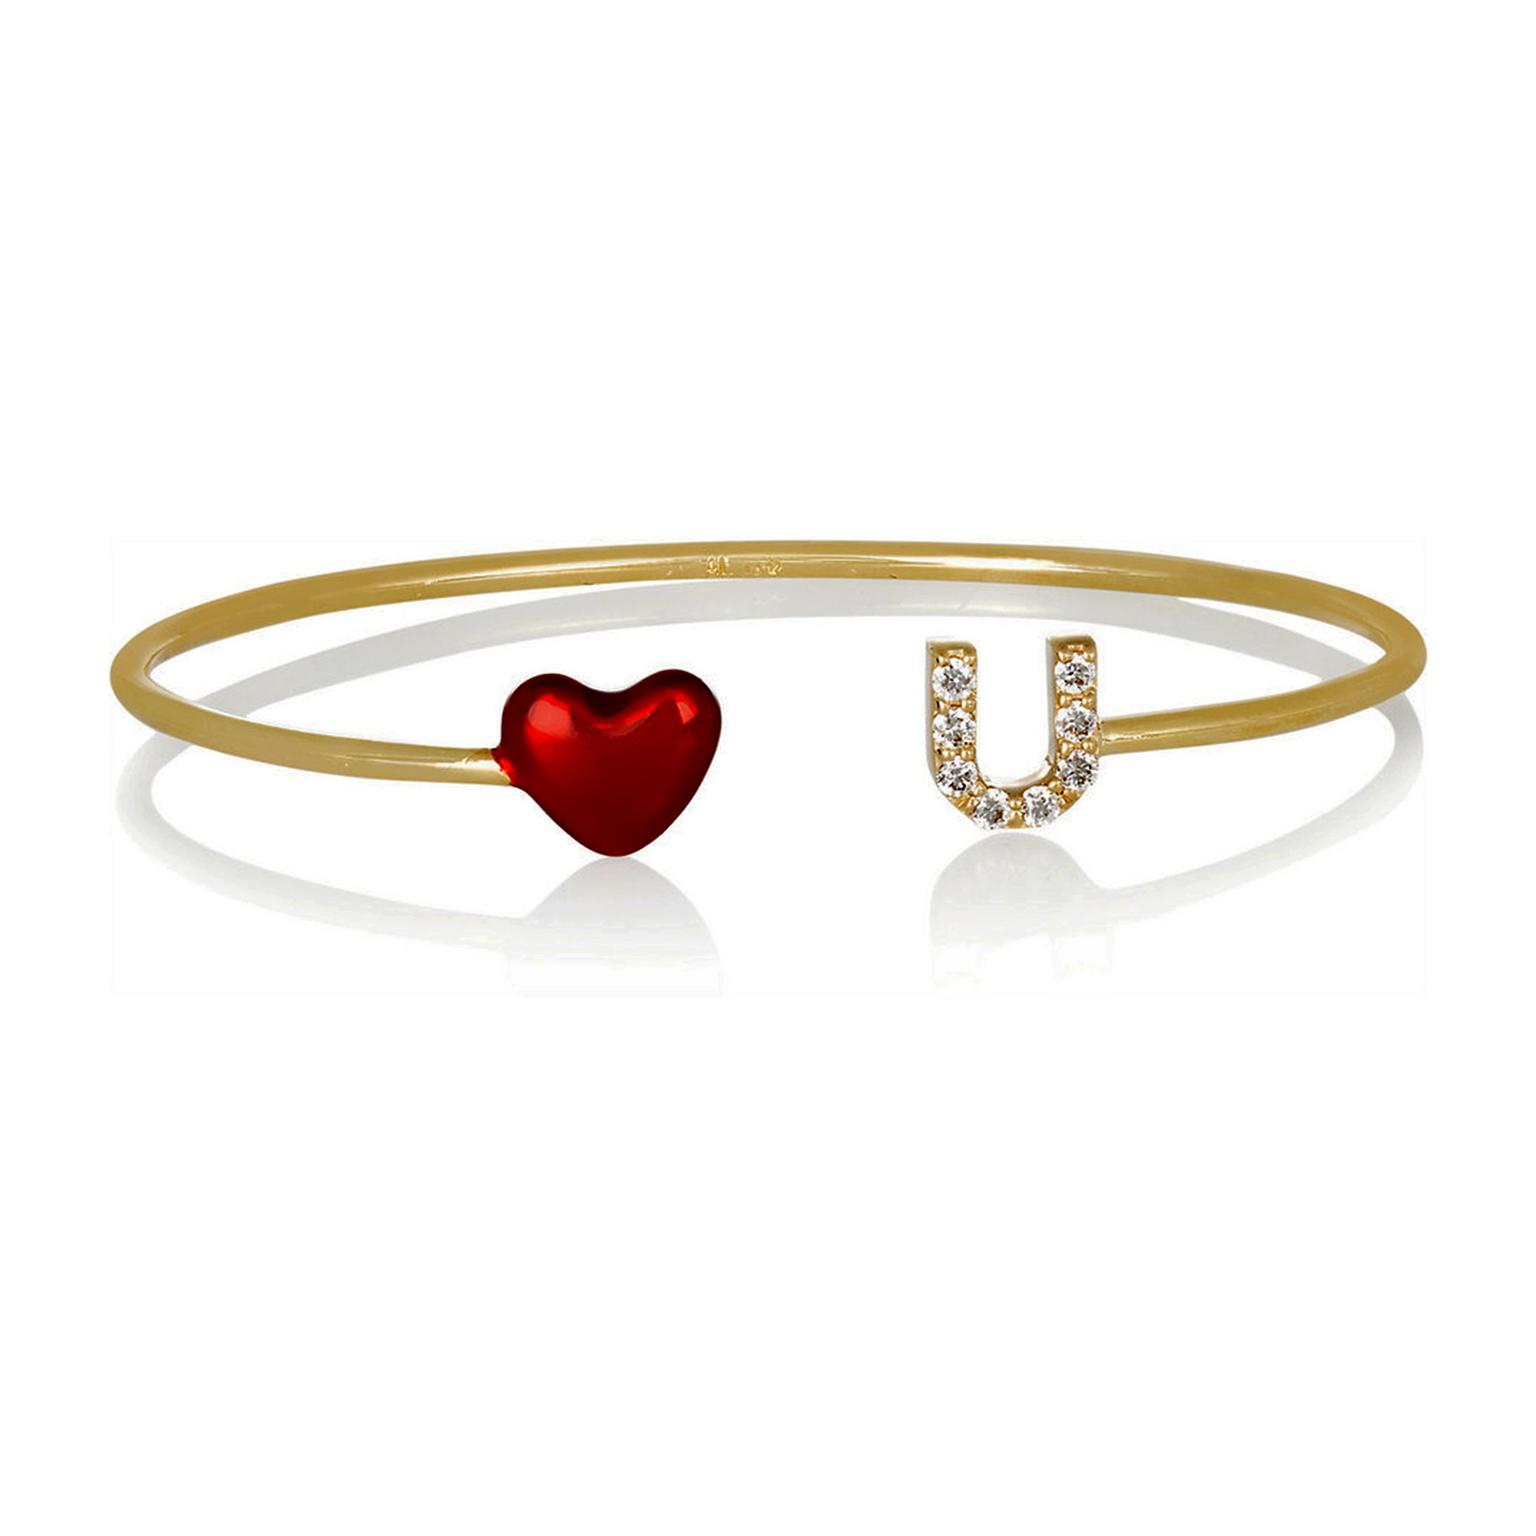 Alison Lou yellow gold, red enamel and diamond Heart cuff